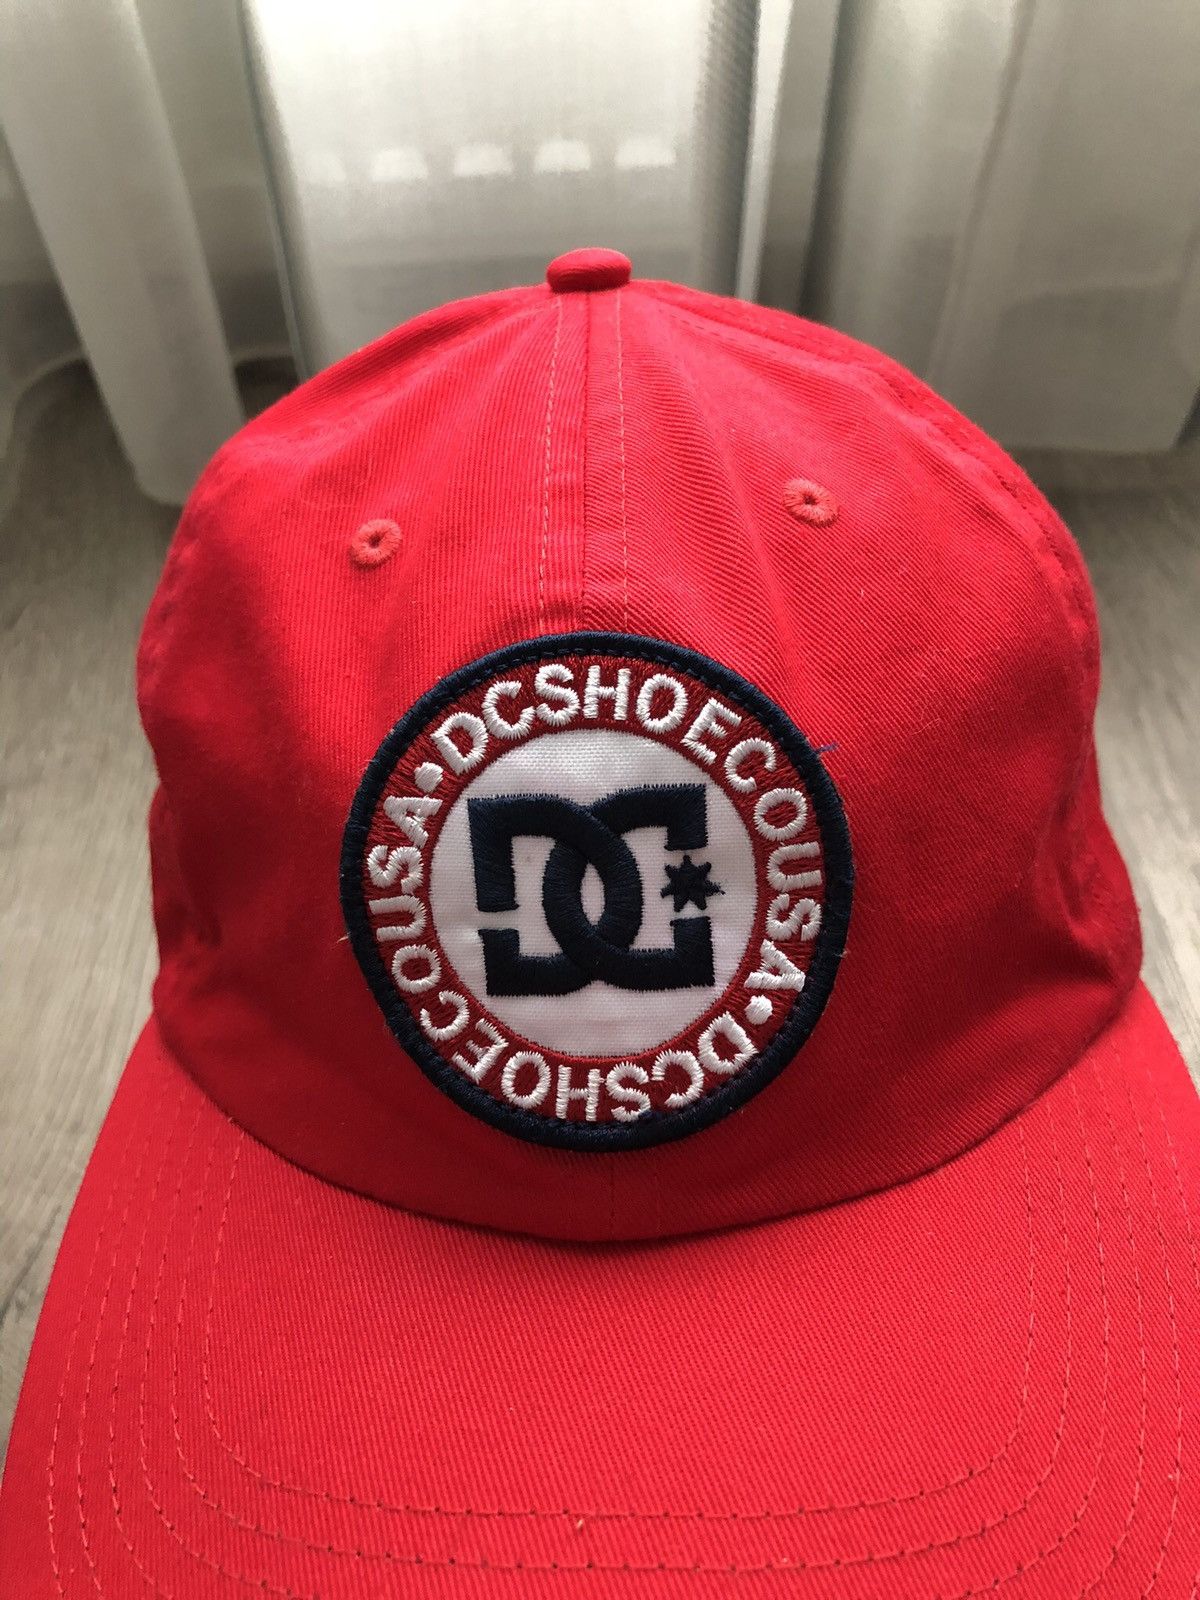 Streetwear DC Shoe Hook-Ups Red Cap Vintage Size ONE SIZE - 2 Preview